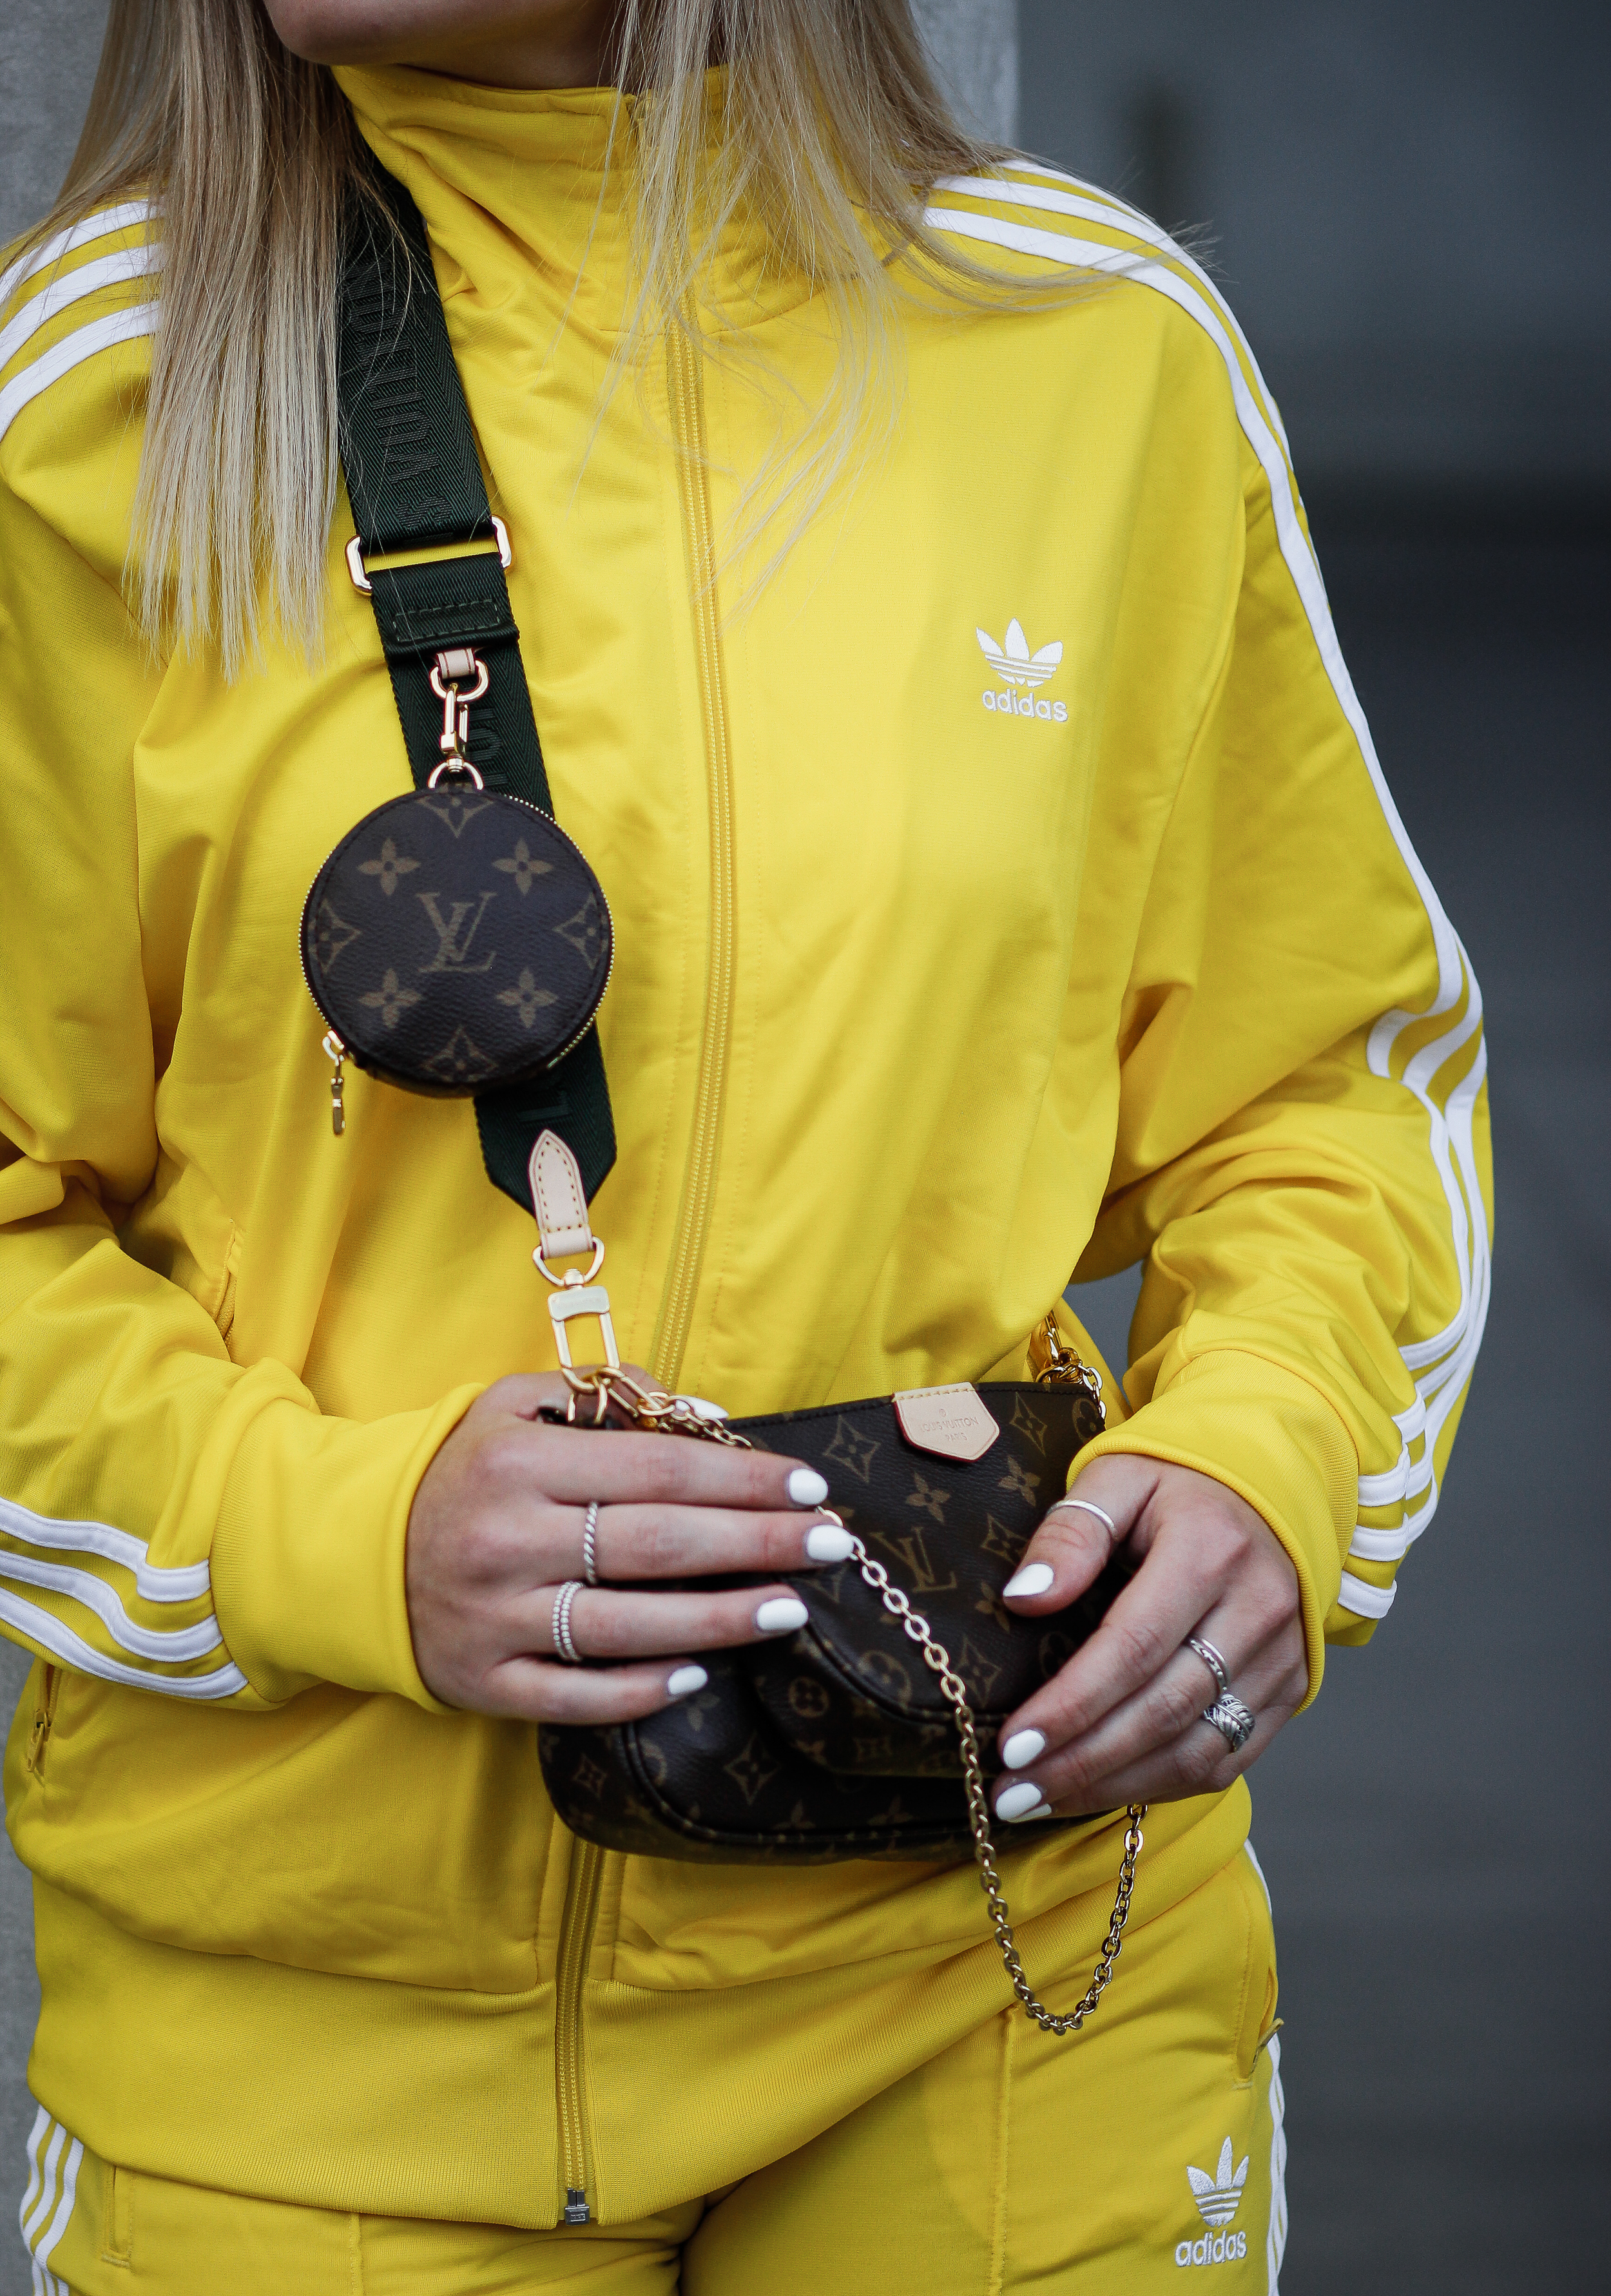 Lauralamode Adidas Outfit Tracksuit Streetstyle Look Outfitoftheday Louis Vuitton Louis Vuitton Multipochette Balenciaga Triple S Munich Berlin Blogger Fashionblogger13